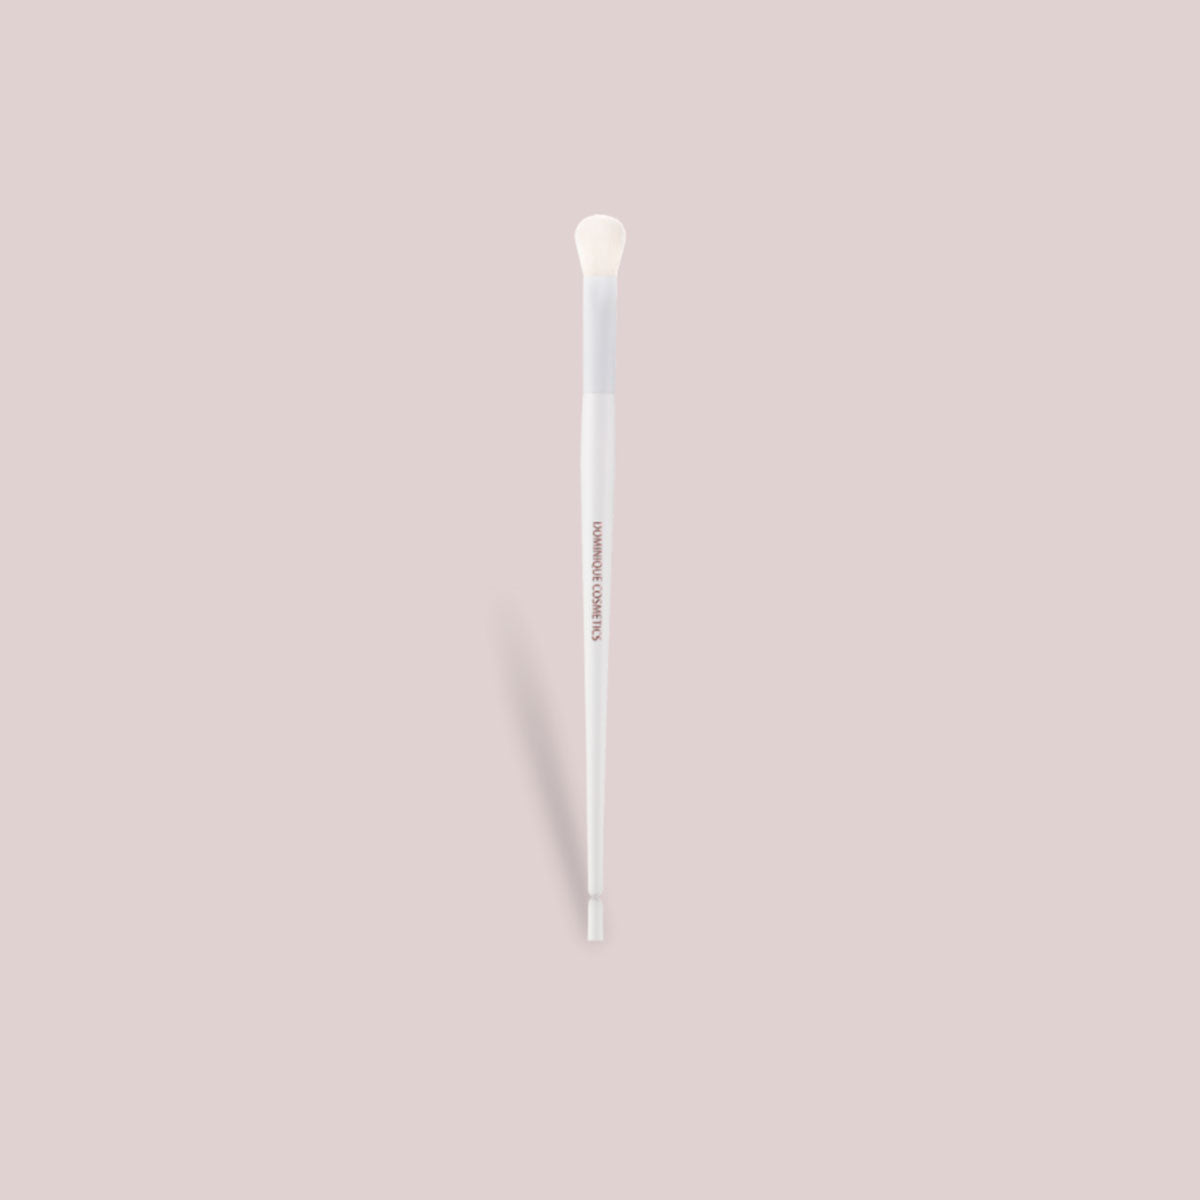 Flat Crease Brush - The Blend & Shade#The Blend & Shade